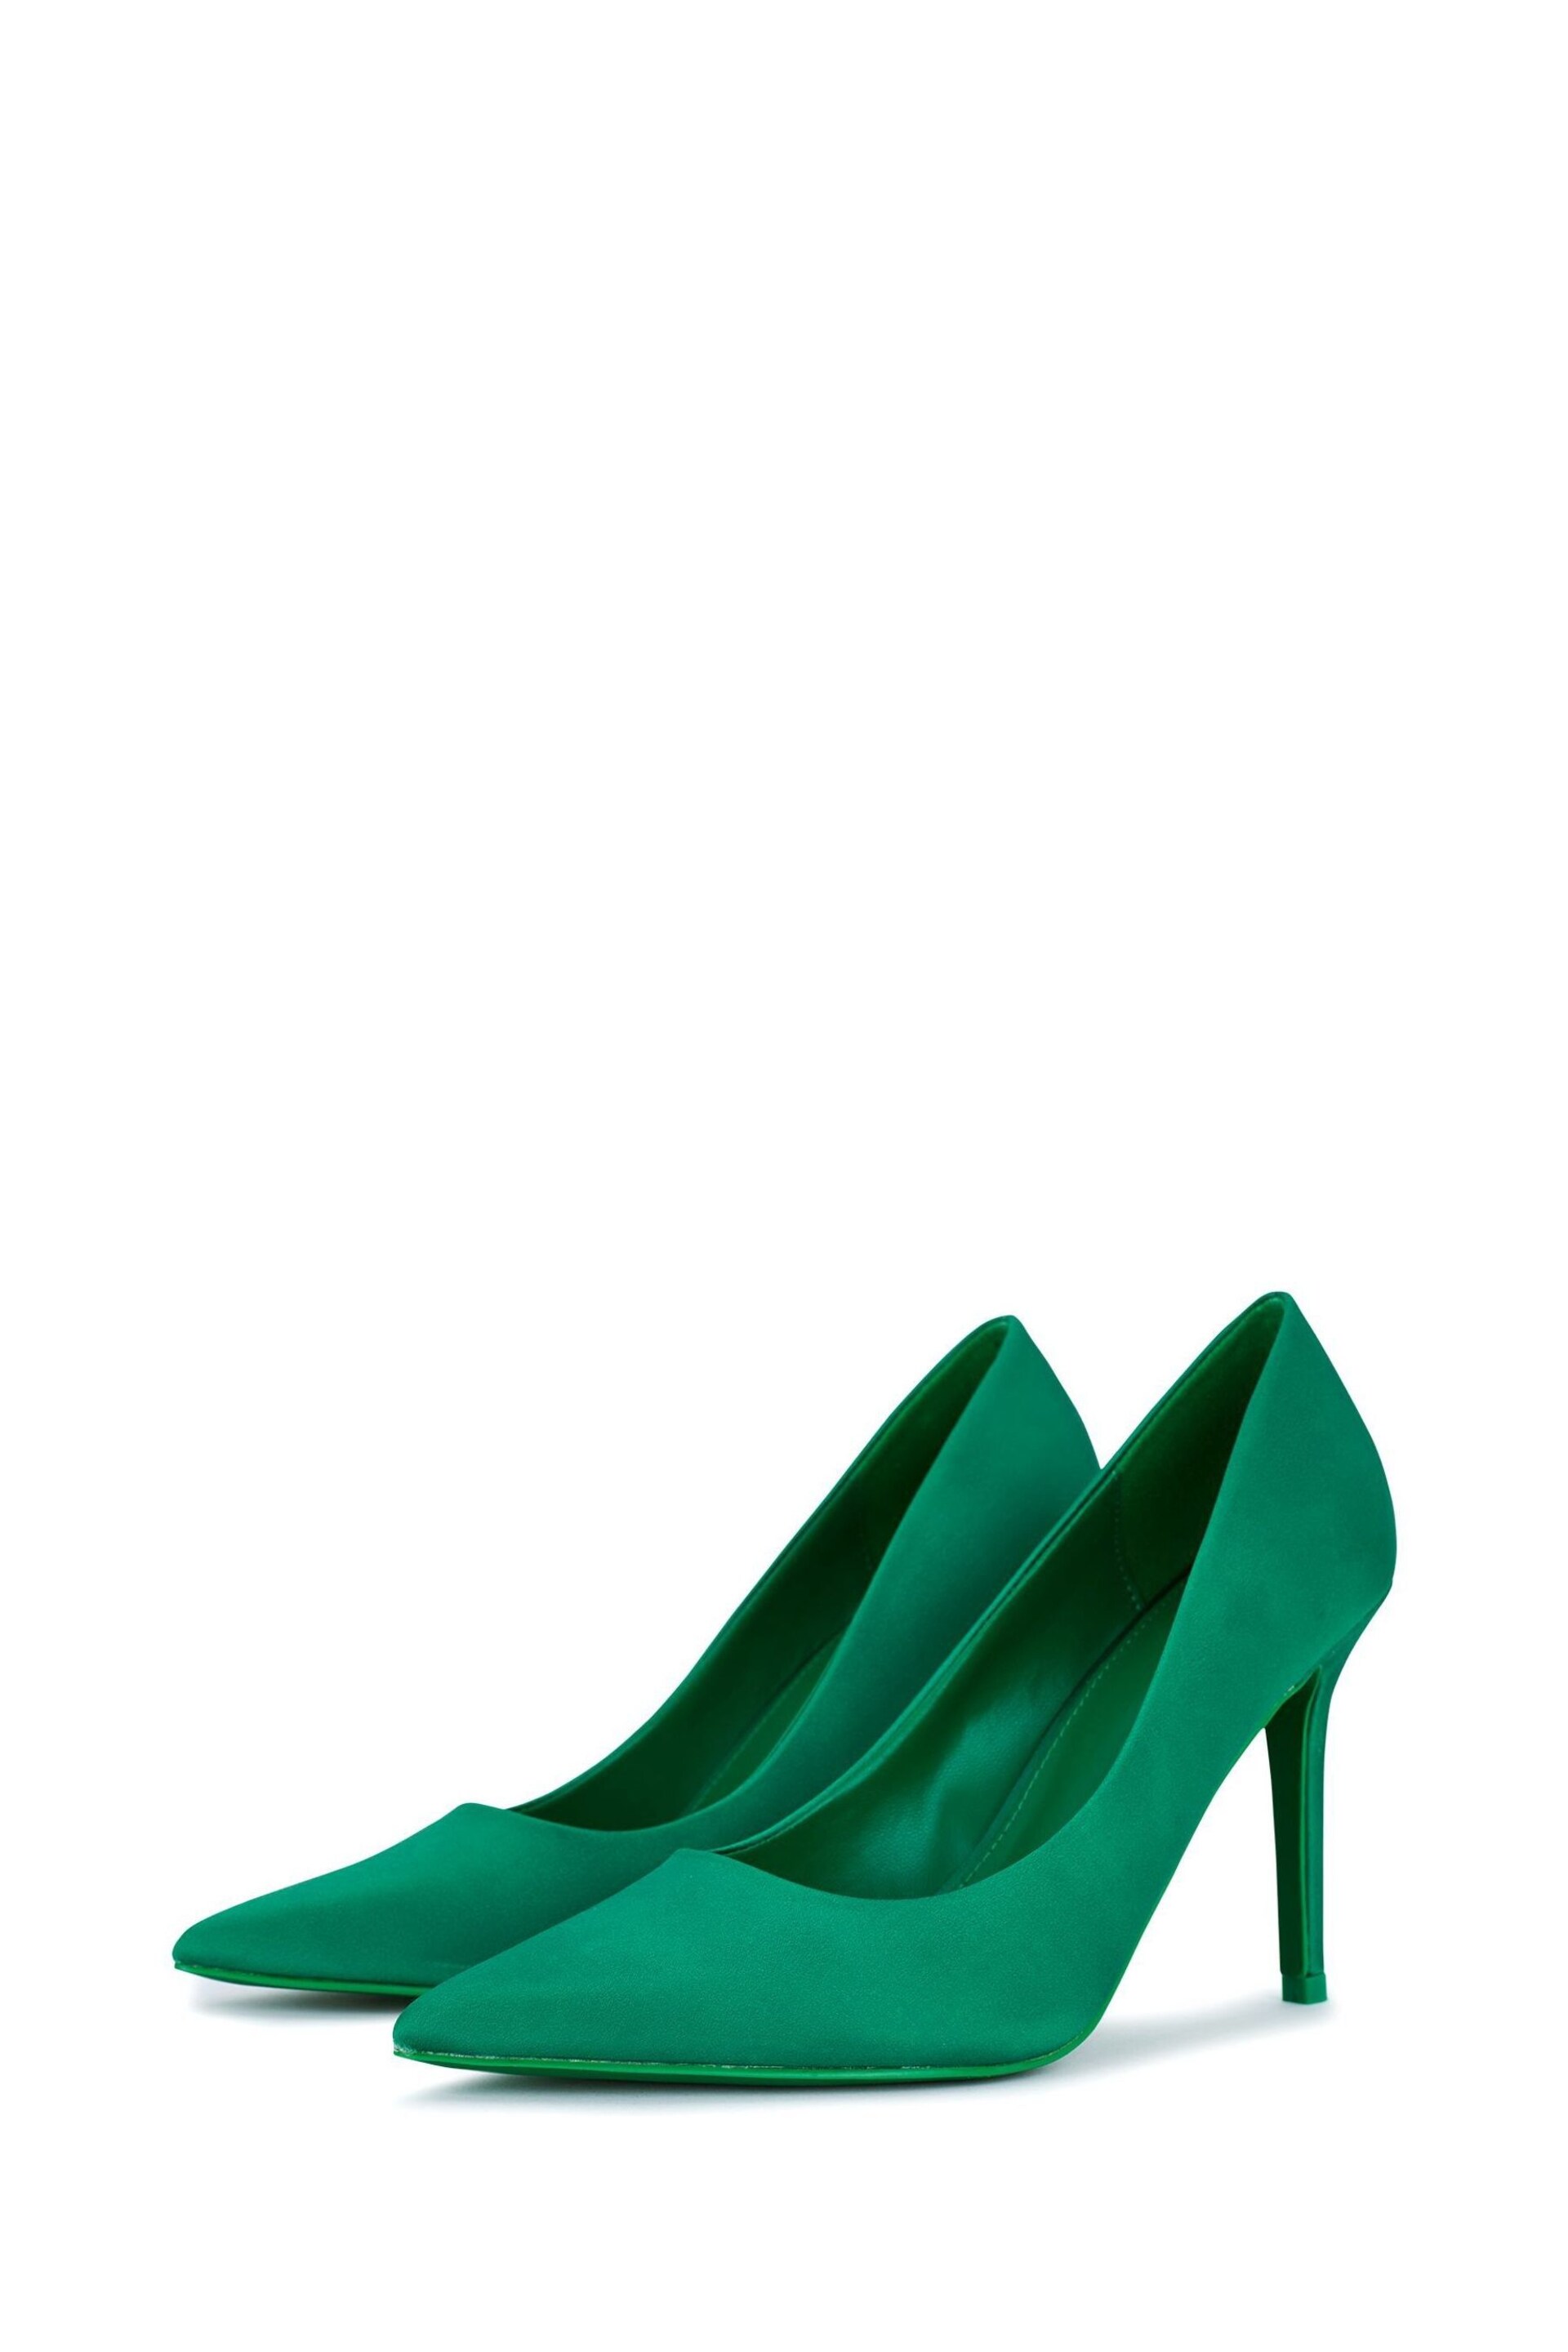 Novo Green Crissy Court Shoes - Image 3 of 5